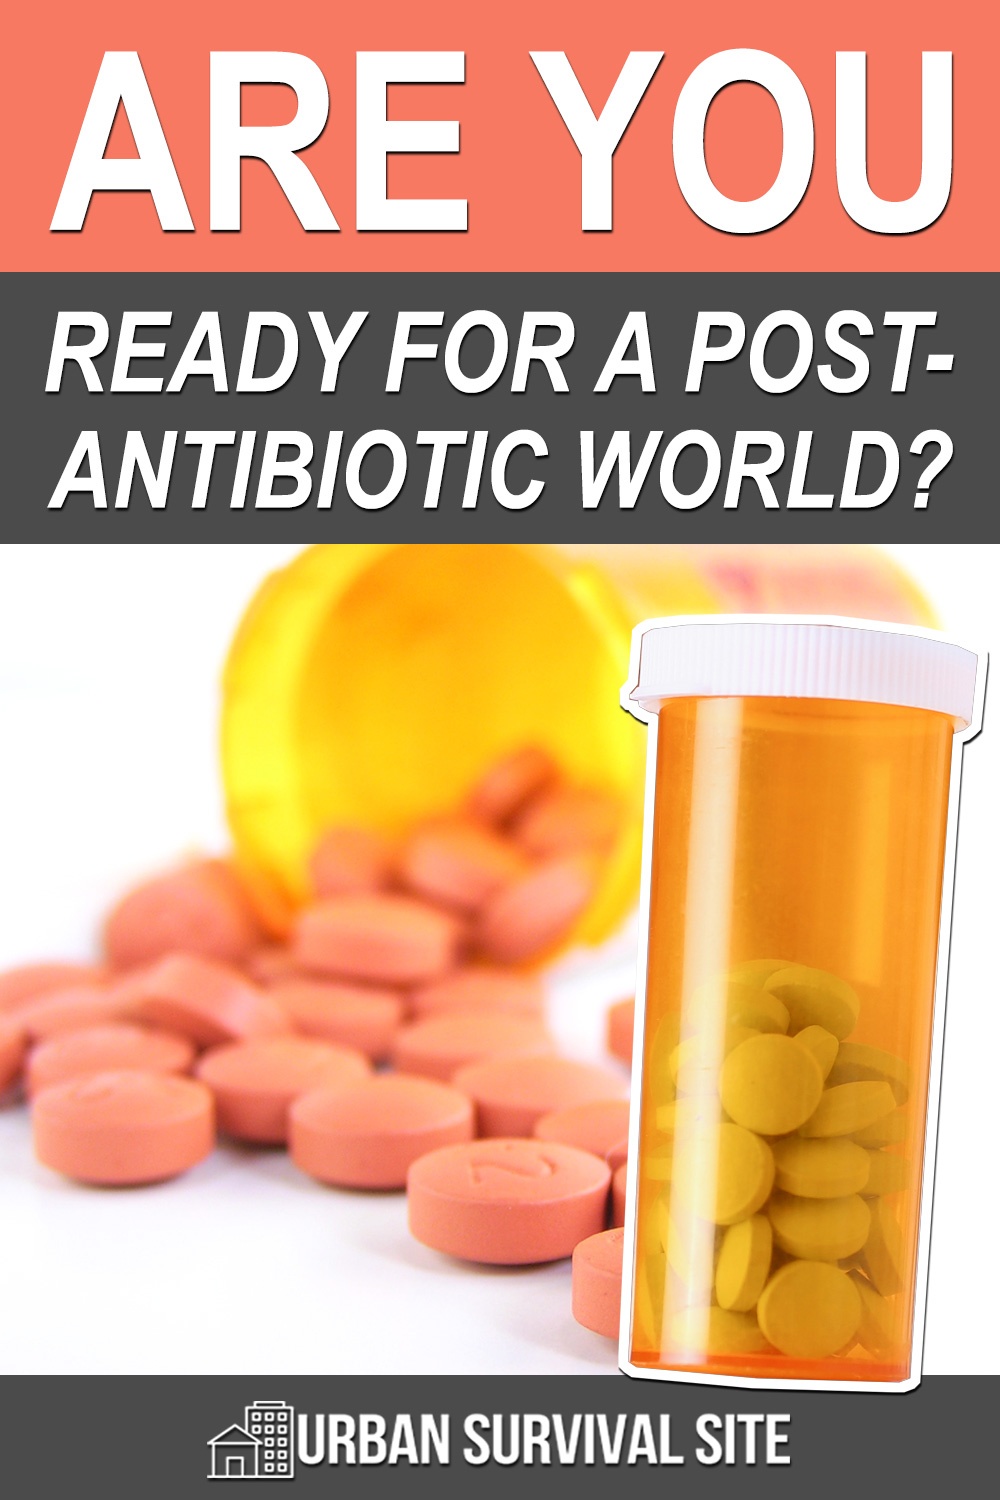 Are You Ready for a Post-Antibiotic World?